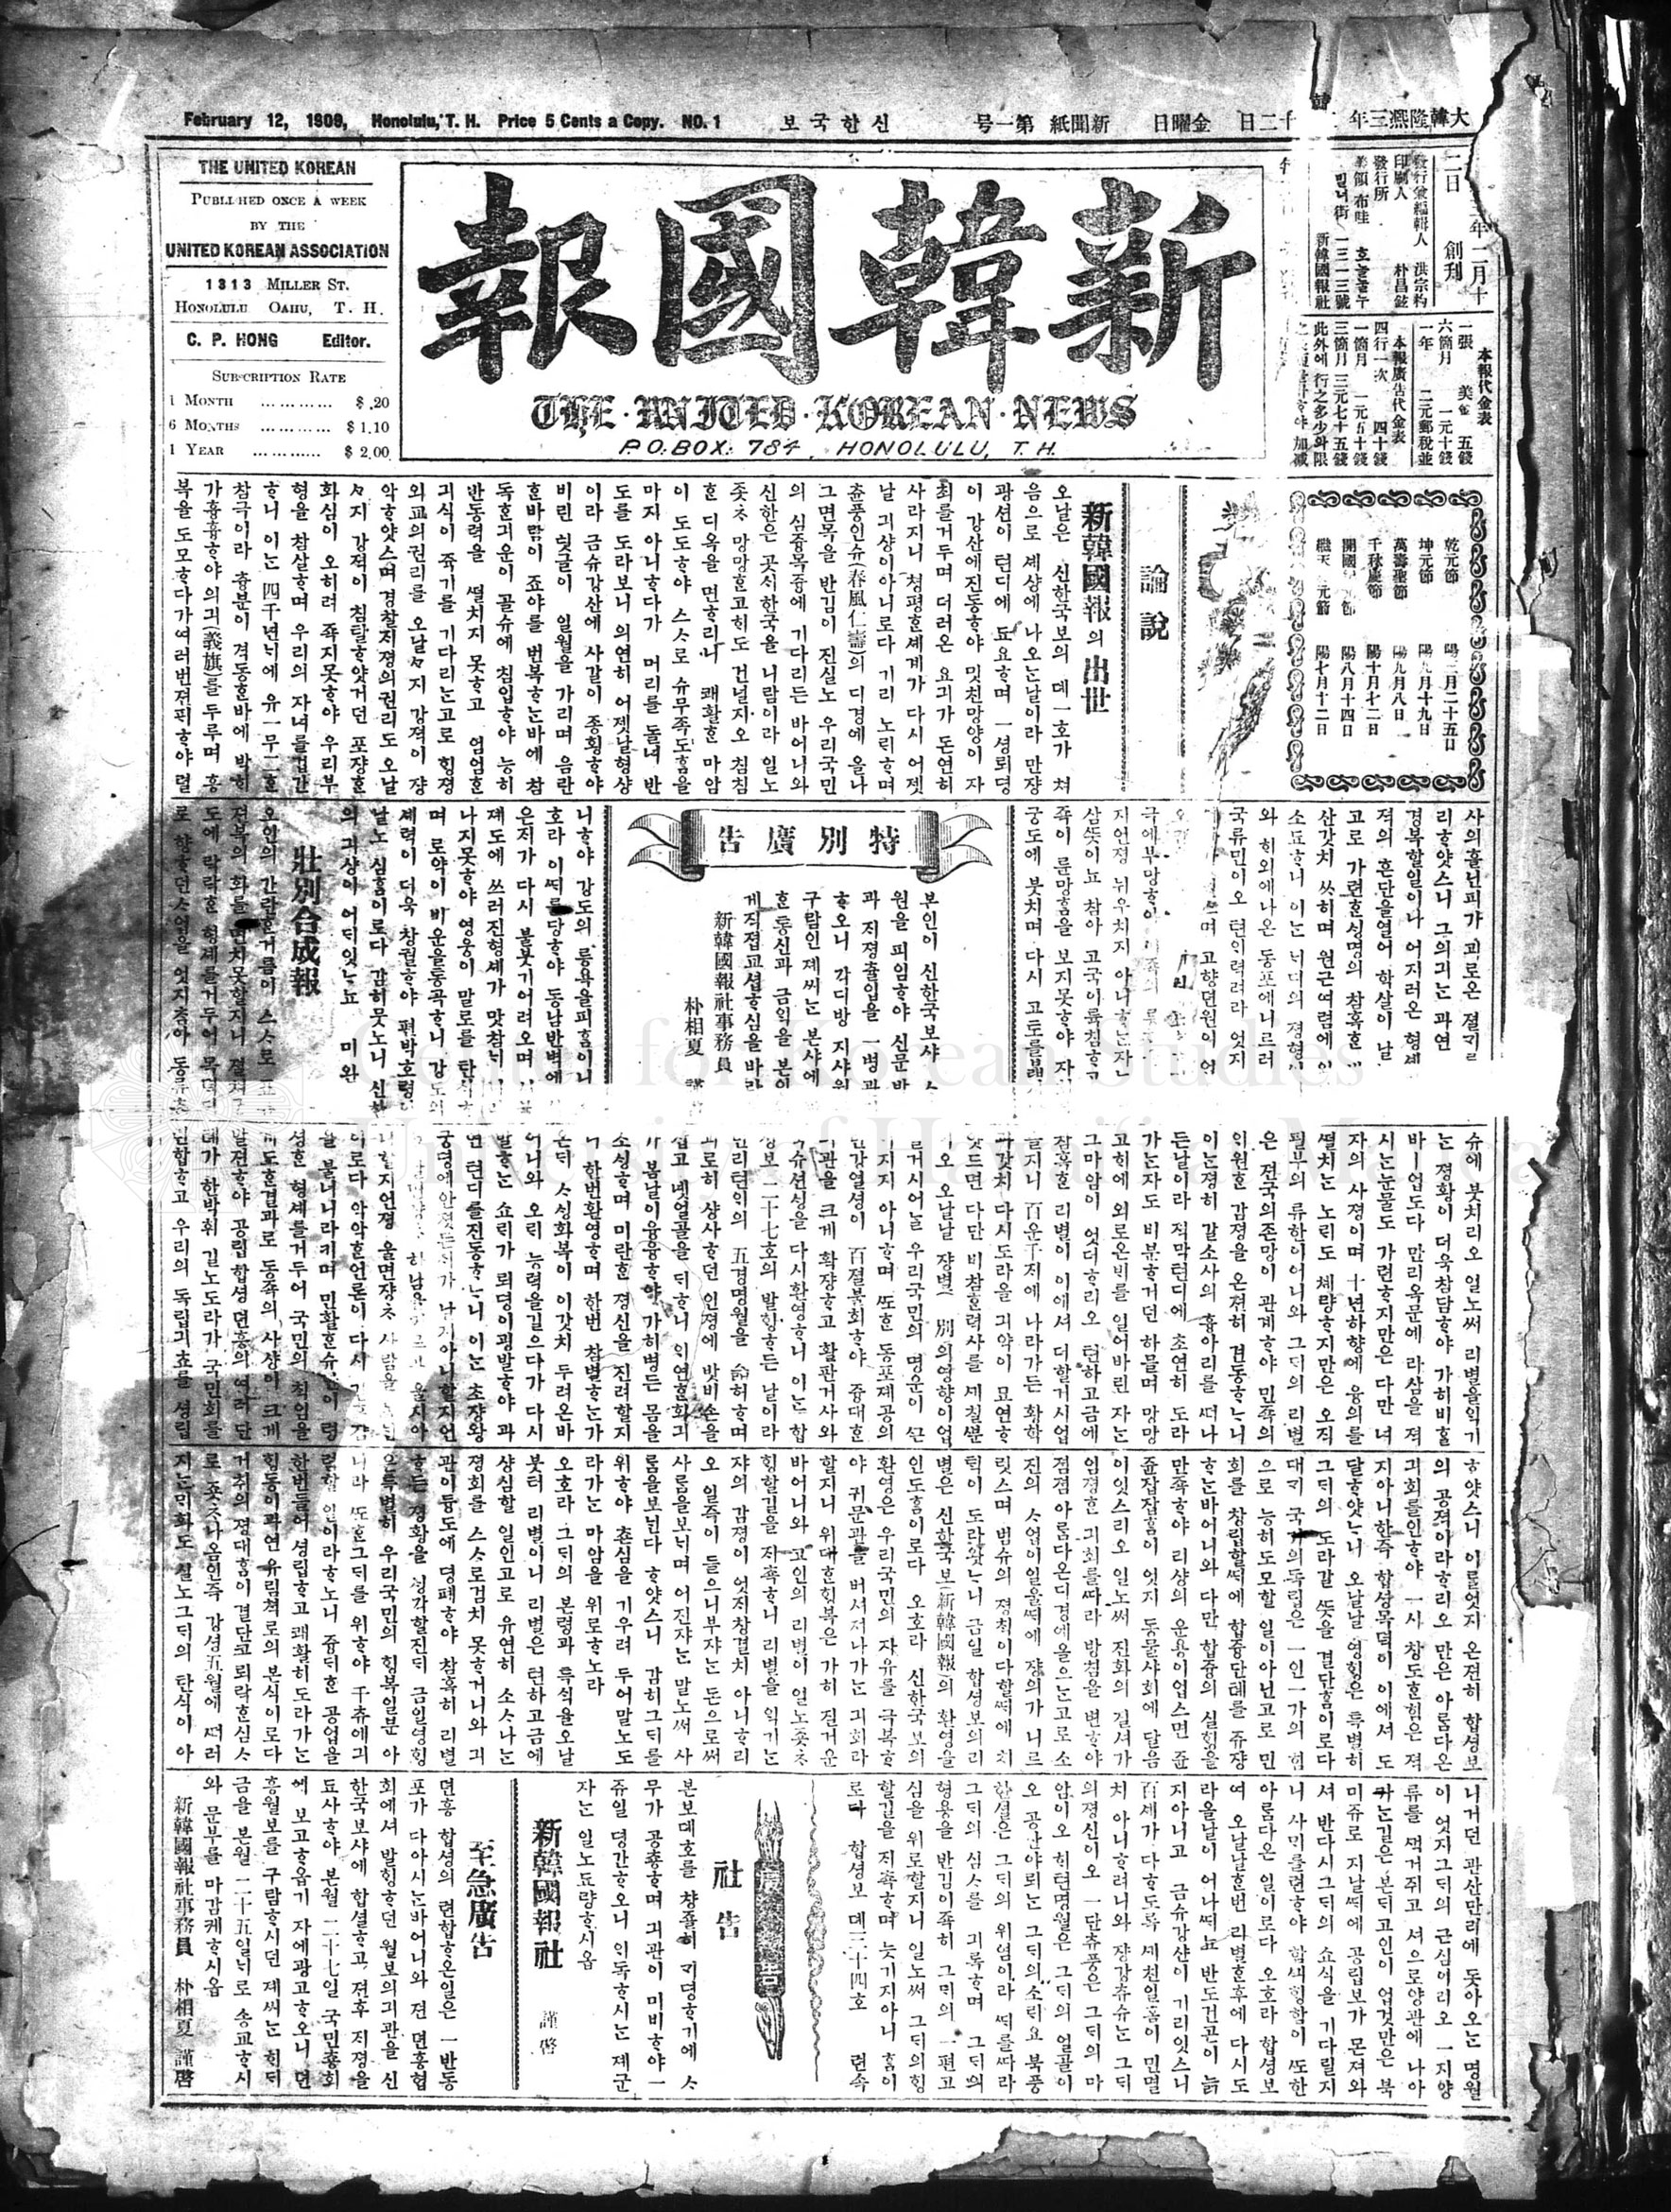 The United Korean News, First issue, Feb 12, 1909